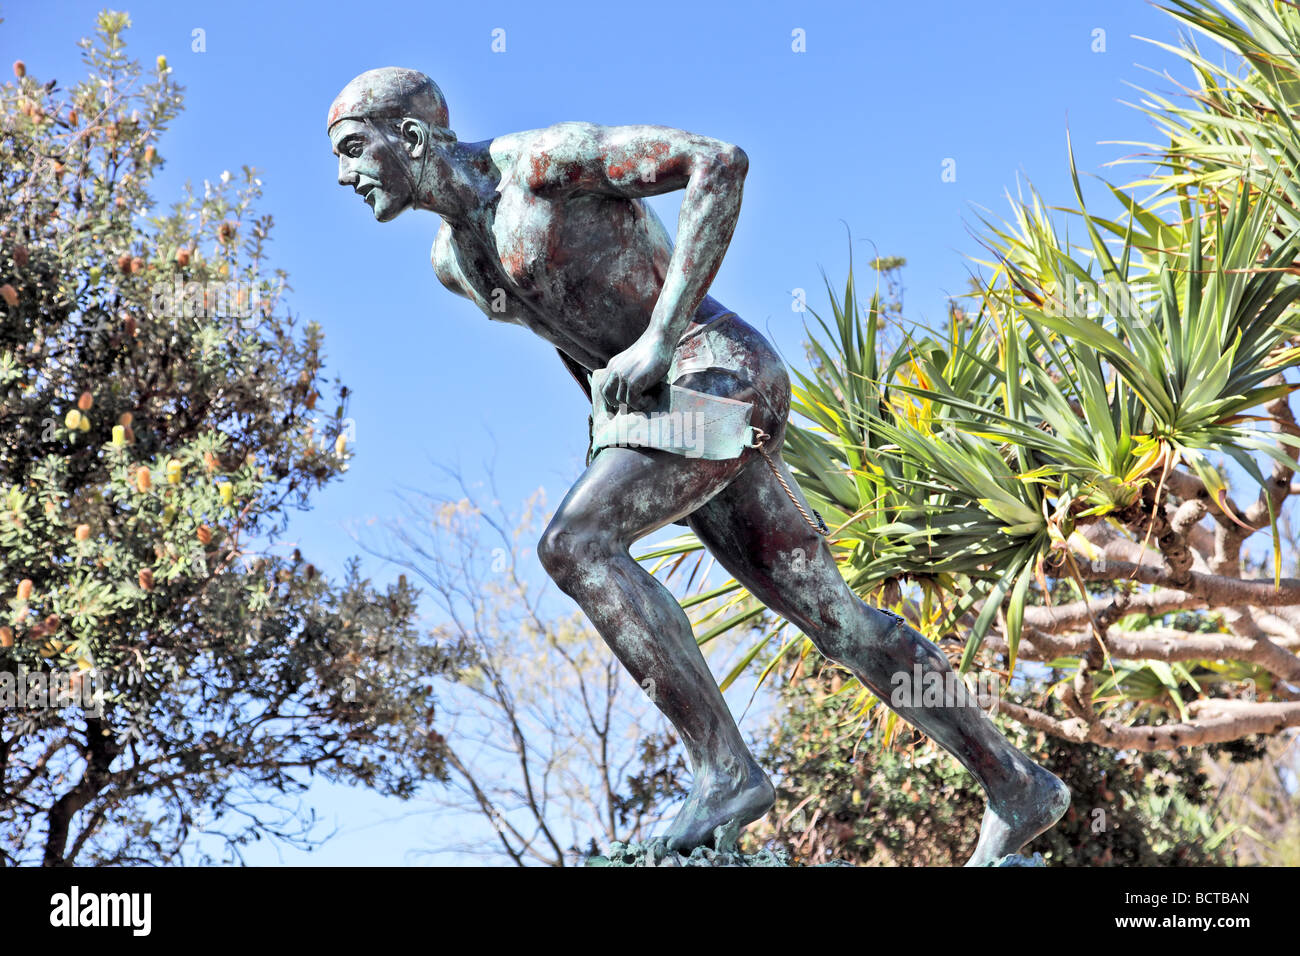 Bronze statue of an Australain lifesaver near a beach with belt and rope Stock Photo